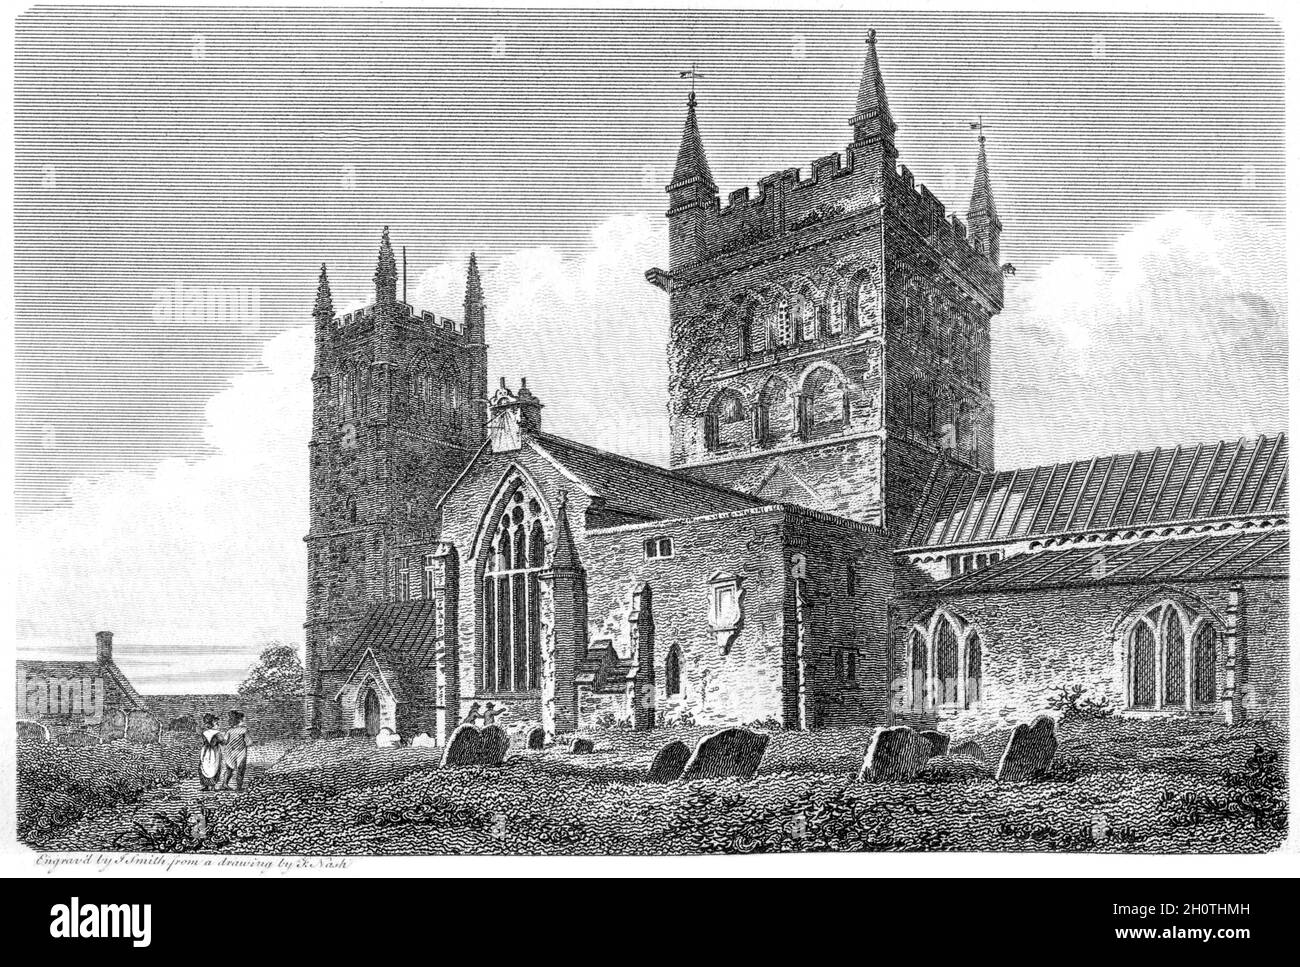 An engraving of Wimborne Minster, Dorsetshire UK scanned at high resolution from a book printed in 1812. Believed copyright free. Stock Photo